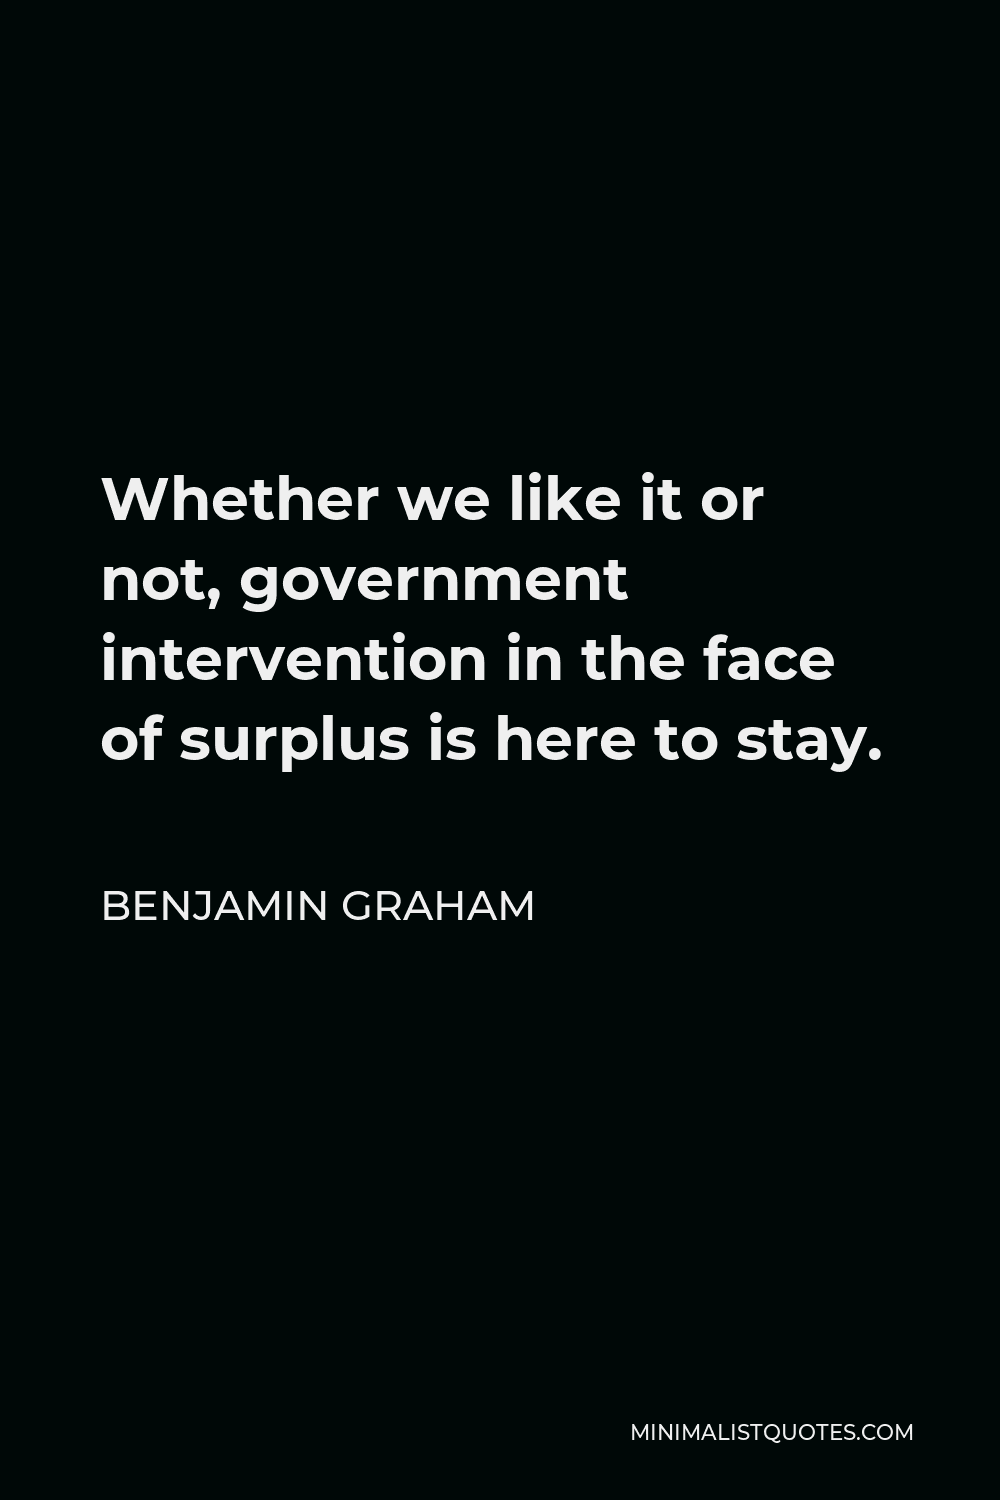 Benjamin Graham Quote - Whether we like it or not, government intervention in the face of surplus is here to stay.